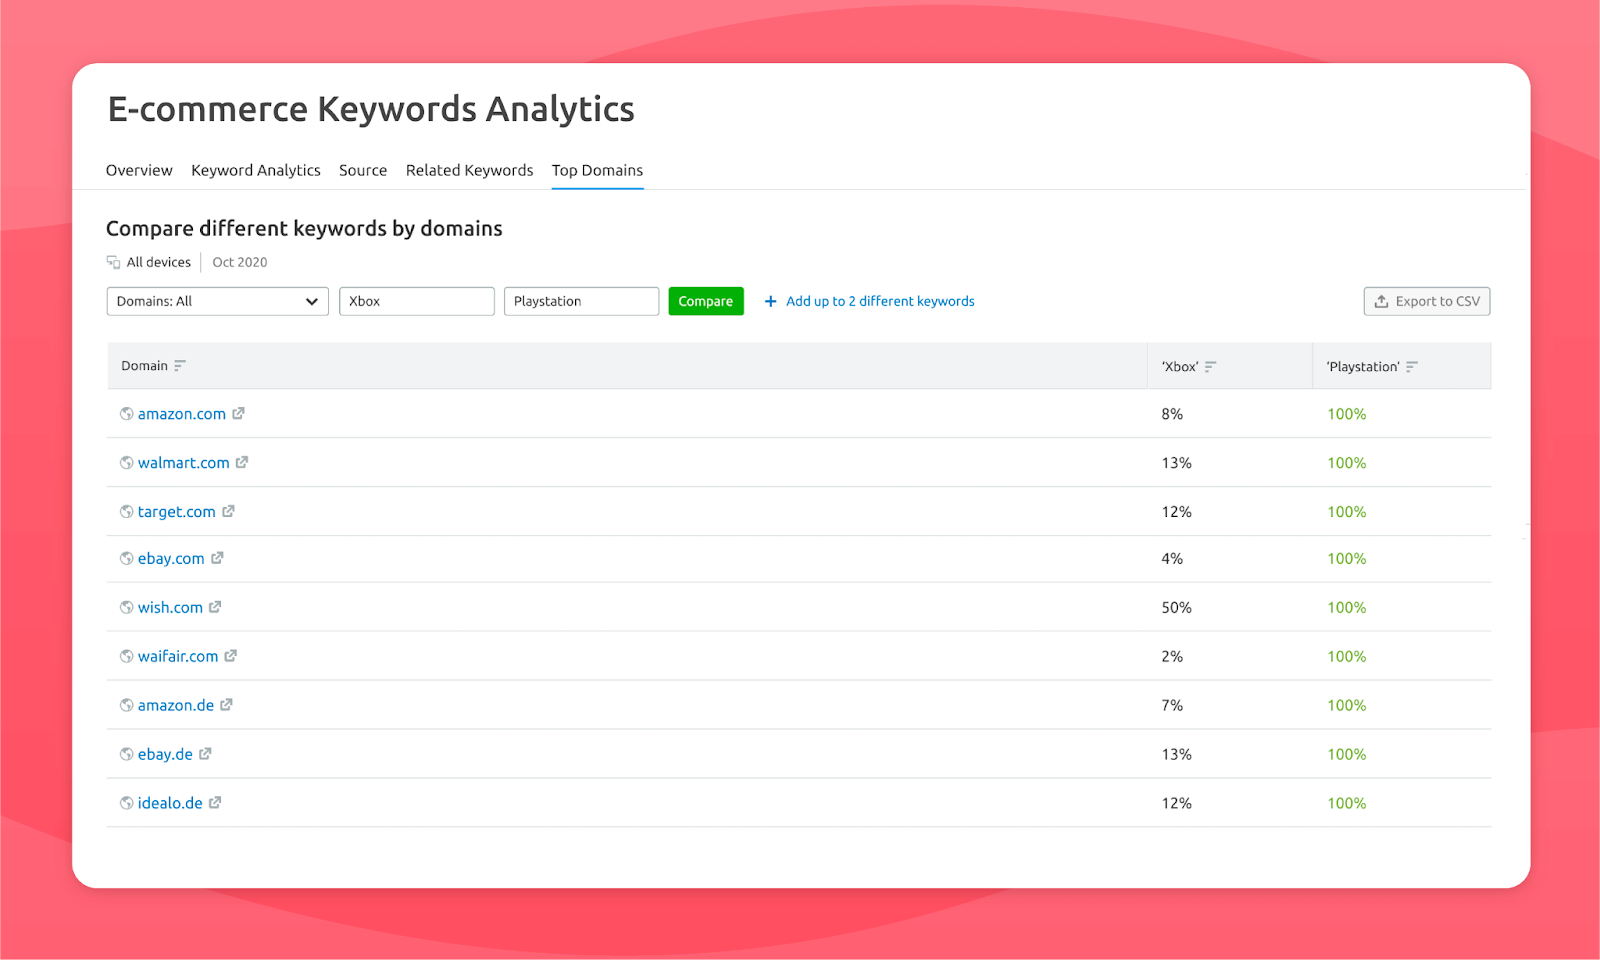 Power Up Your Amazon Business With a Smart Keyword Strategy